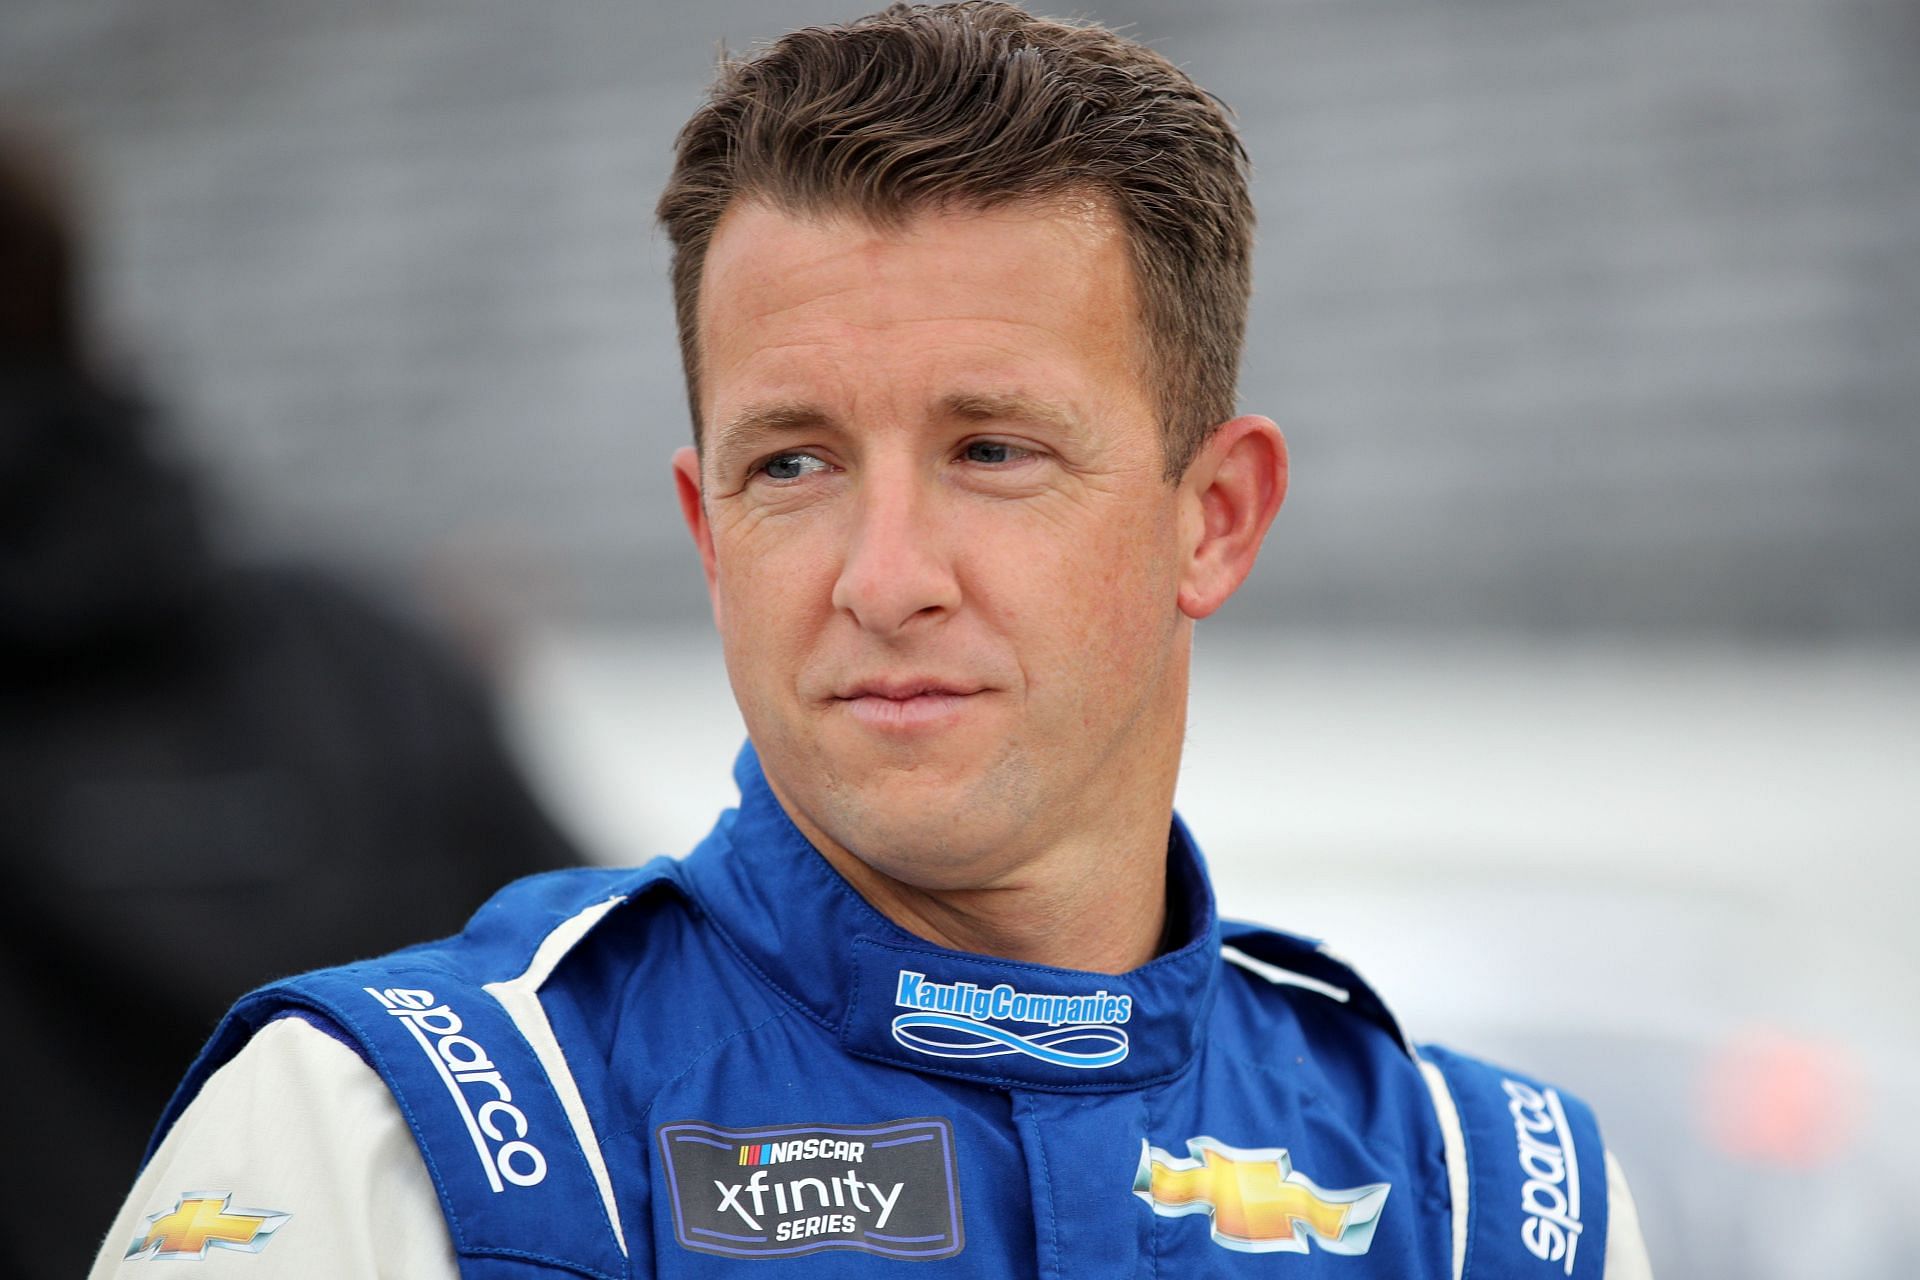 AJ Allmendinger waits on the grid during qualifying for the NASCAR Xfinity Series Call 811 Before You Dig 250 powered by Call 811.com at Martinsville Speedway. (Photo by Meg Oliphant/Getty Images)